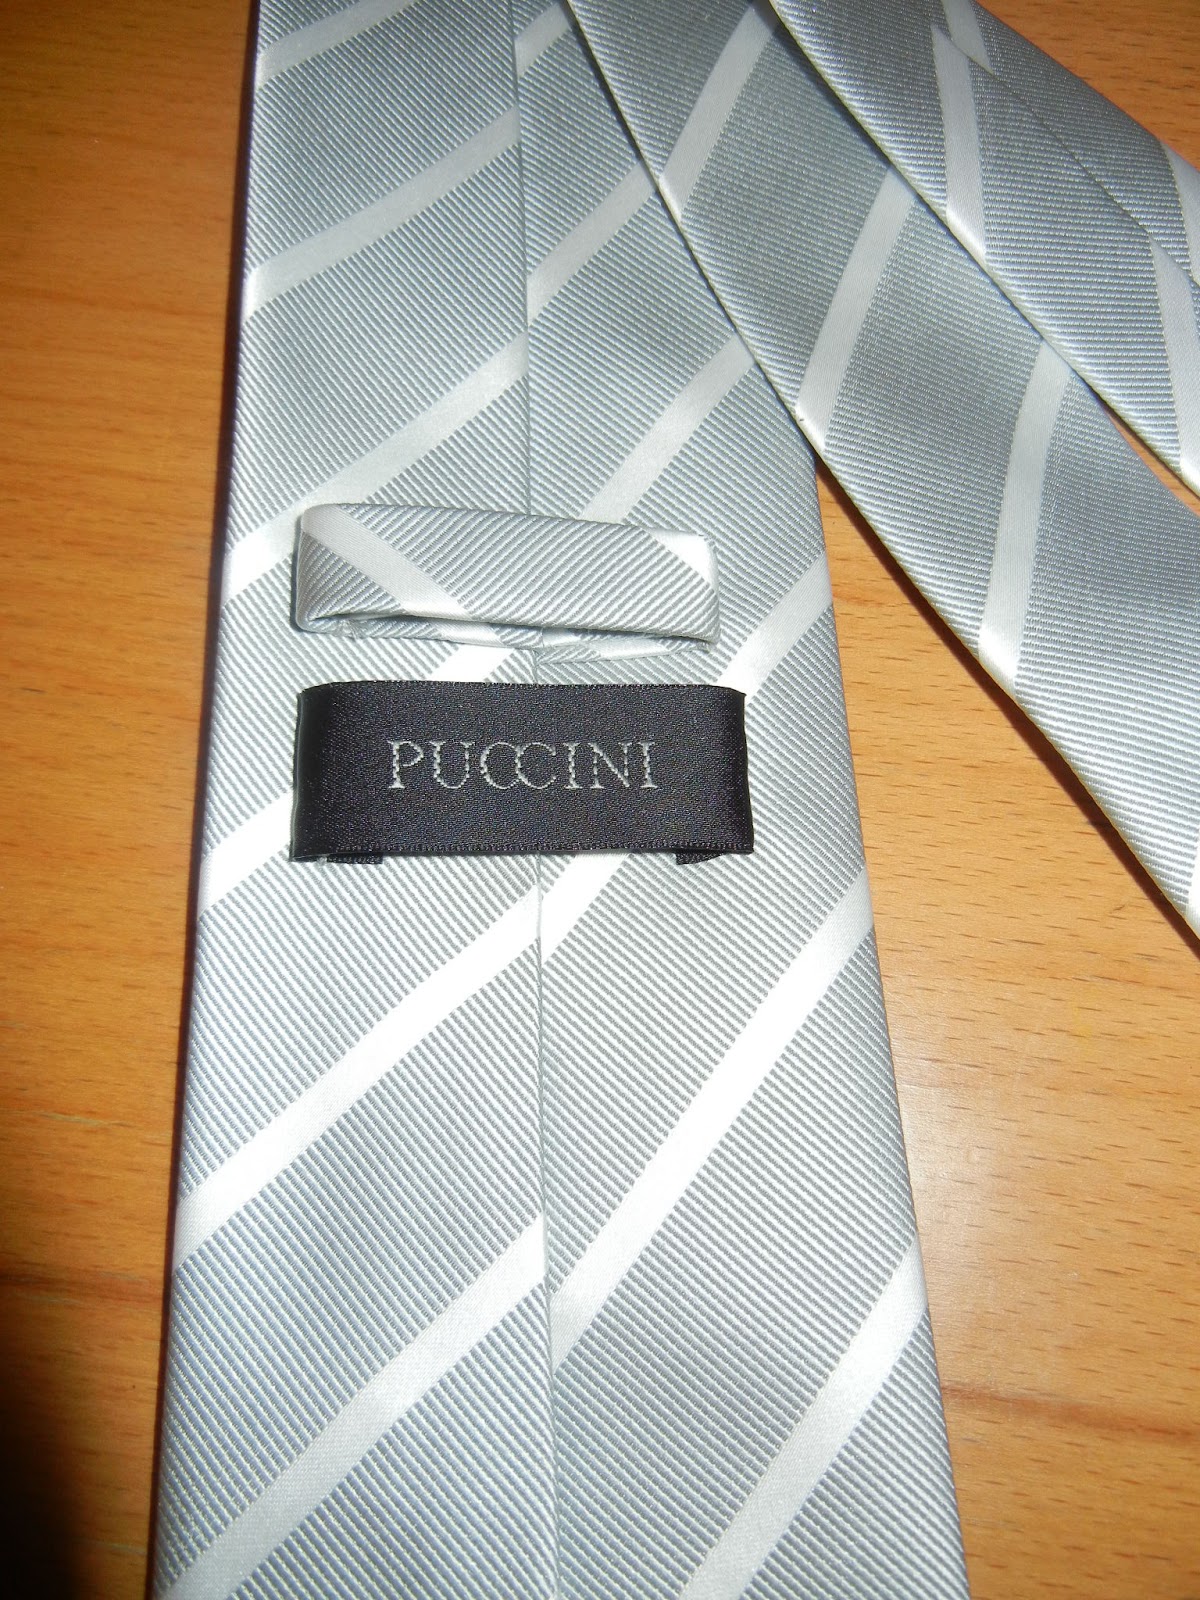 Freebies in Mailbox: Bows 'N Ties Repp-Striped Tie By Puccini ~ Review